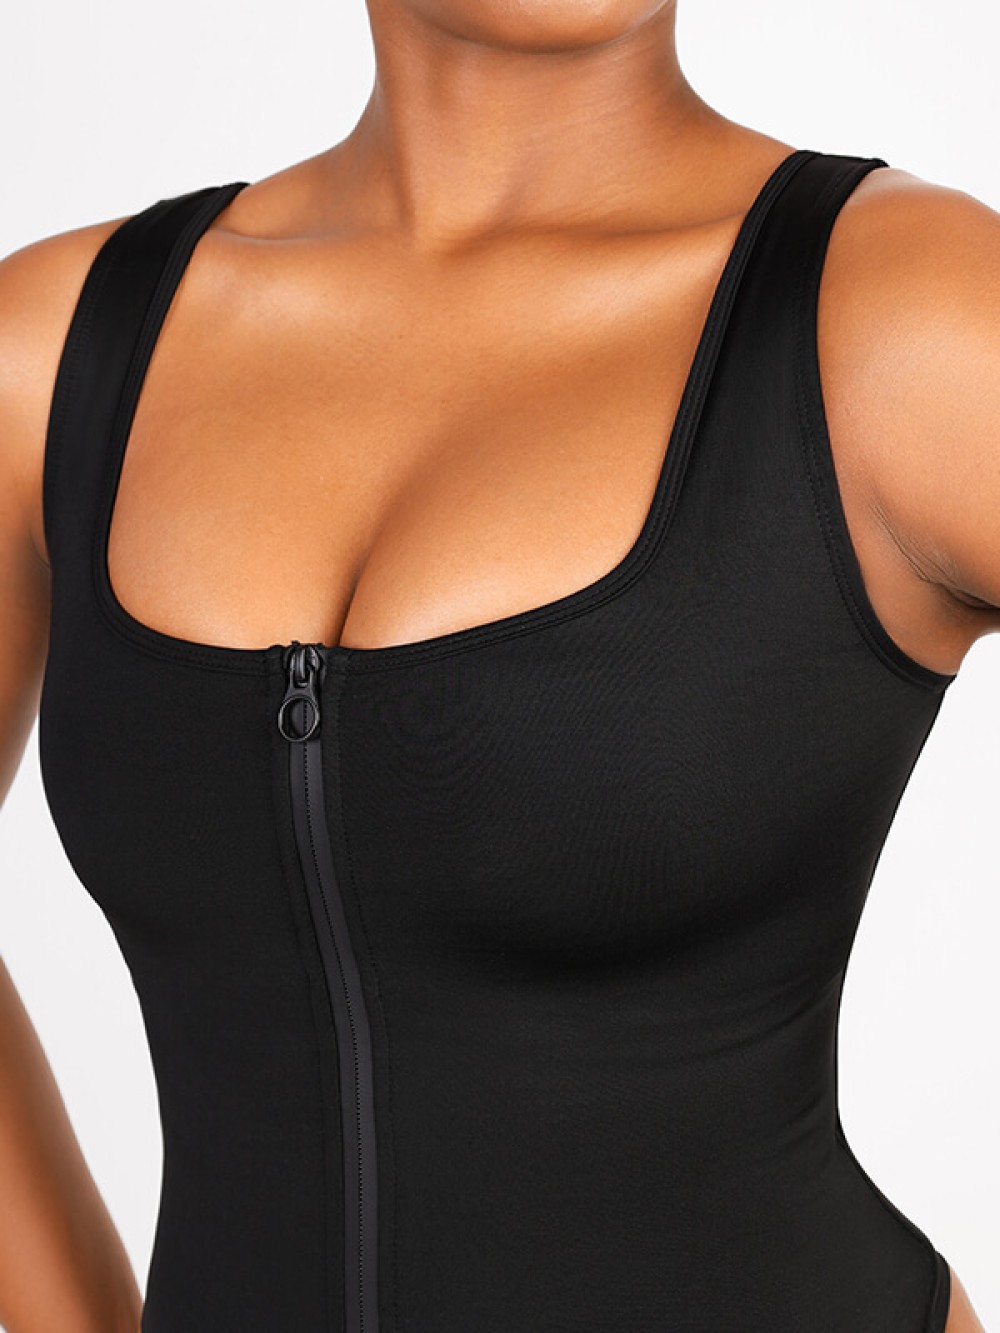 Shaping Tummy control One Piece Swimsuit